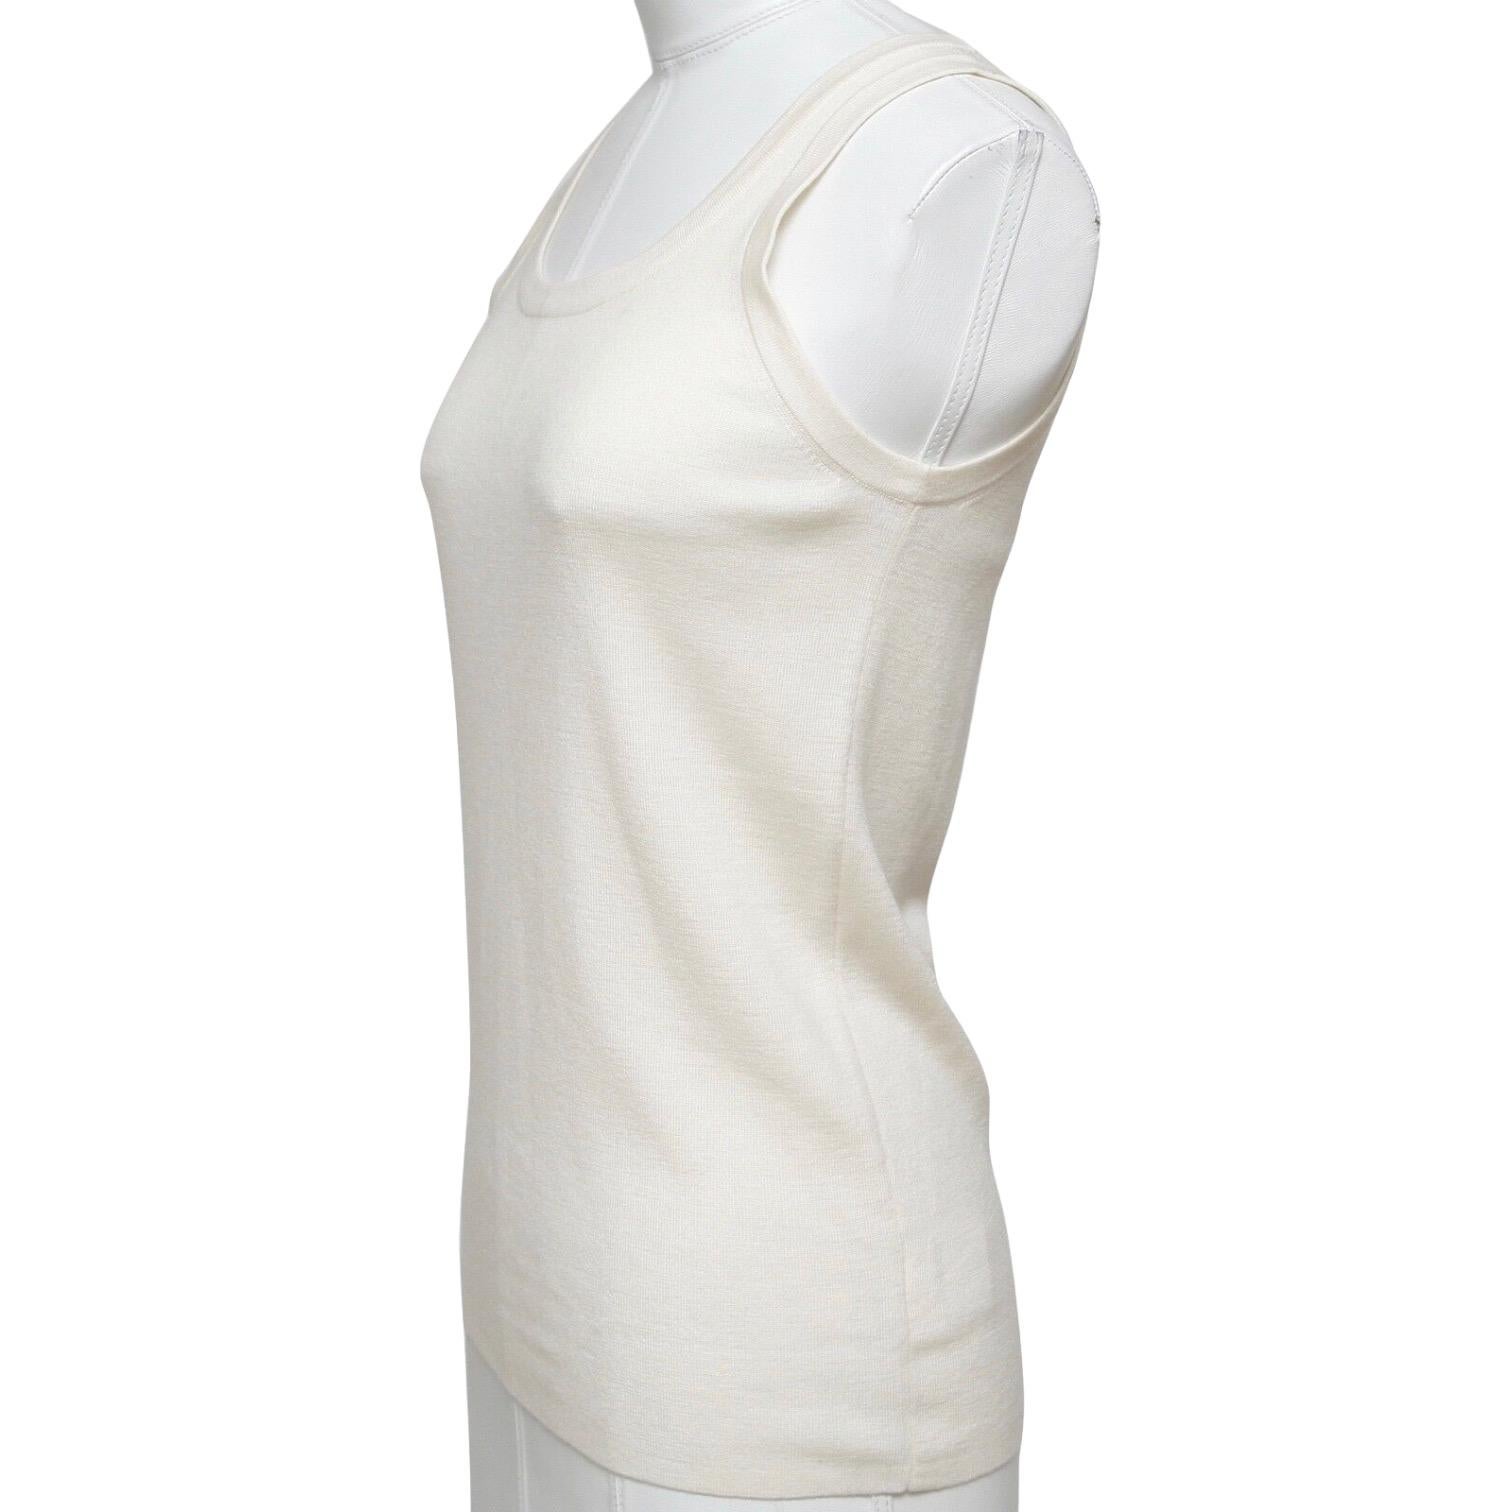 AKRIS PUNTO Sleeveless Top Sweater Knit Shirt Shell Wool Cream Sz 8 40 BNWT In New Condition For Sale In Hollywood, FL